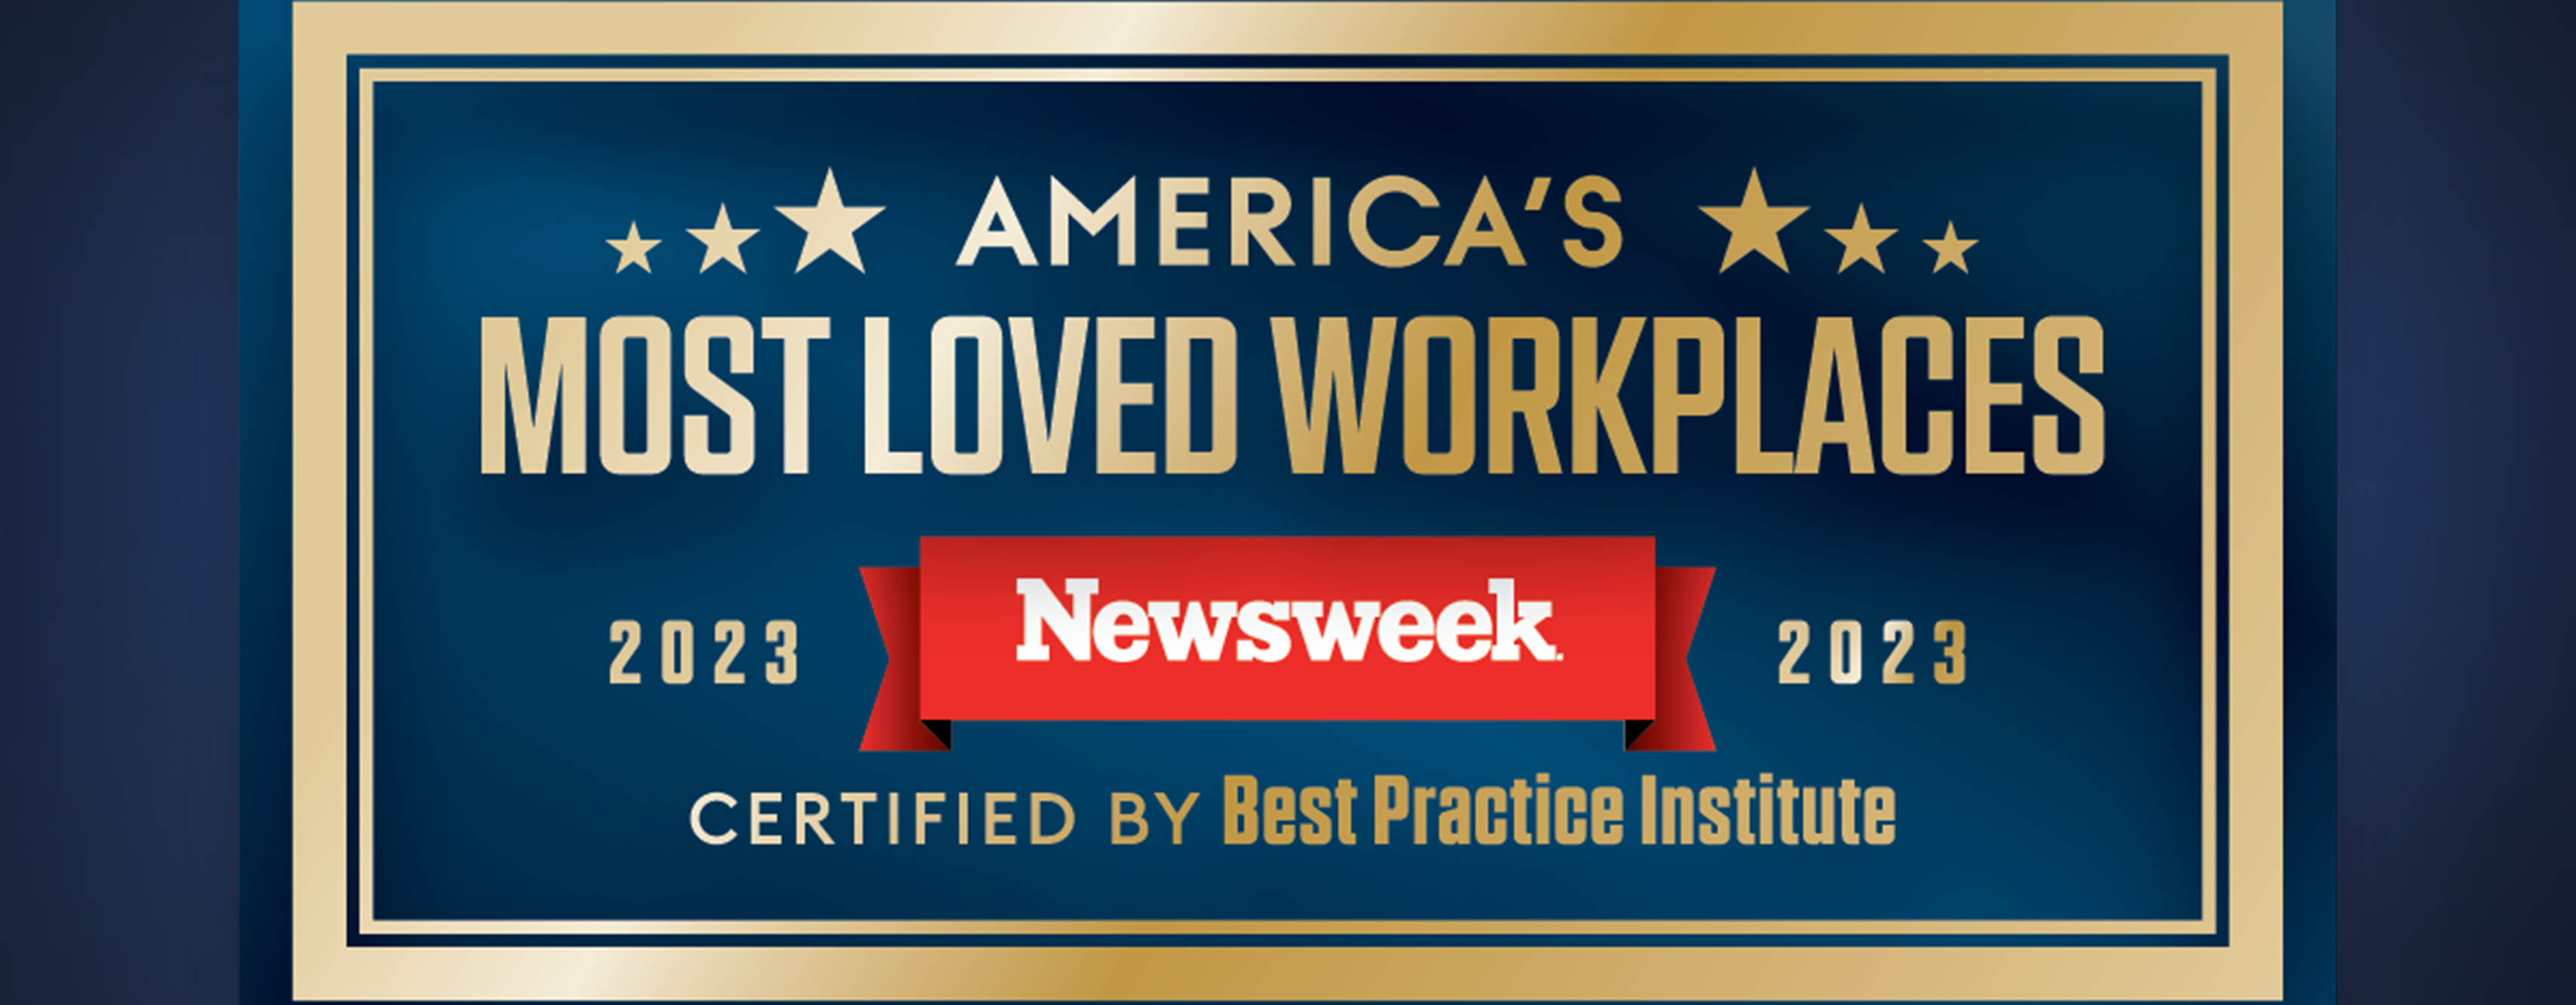 Newsroom - Most Loved Workplace®